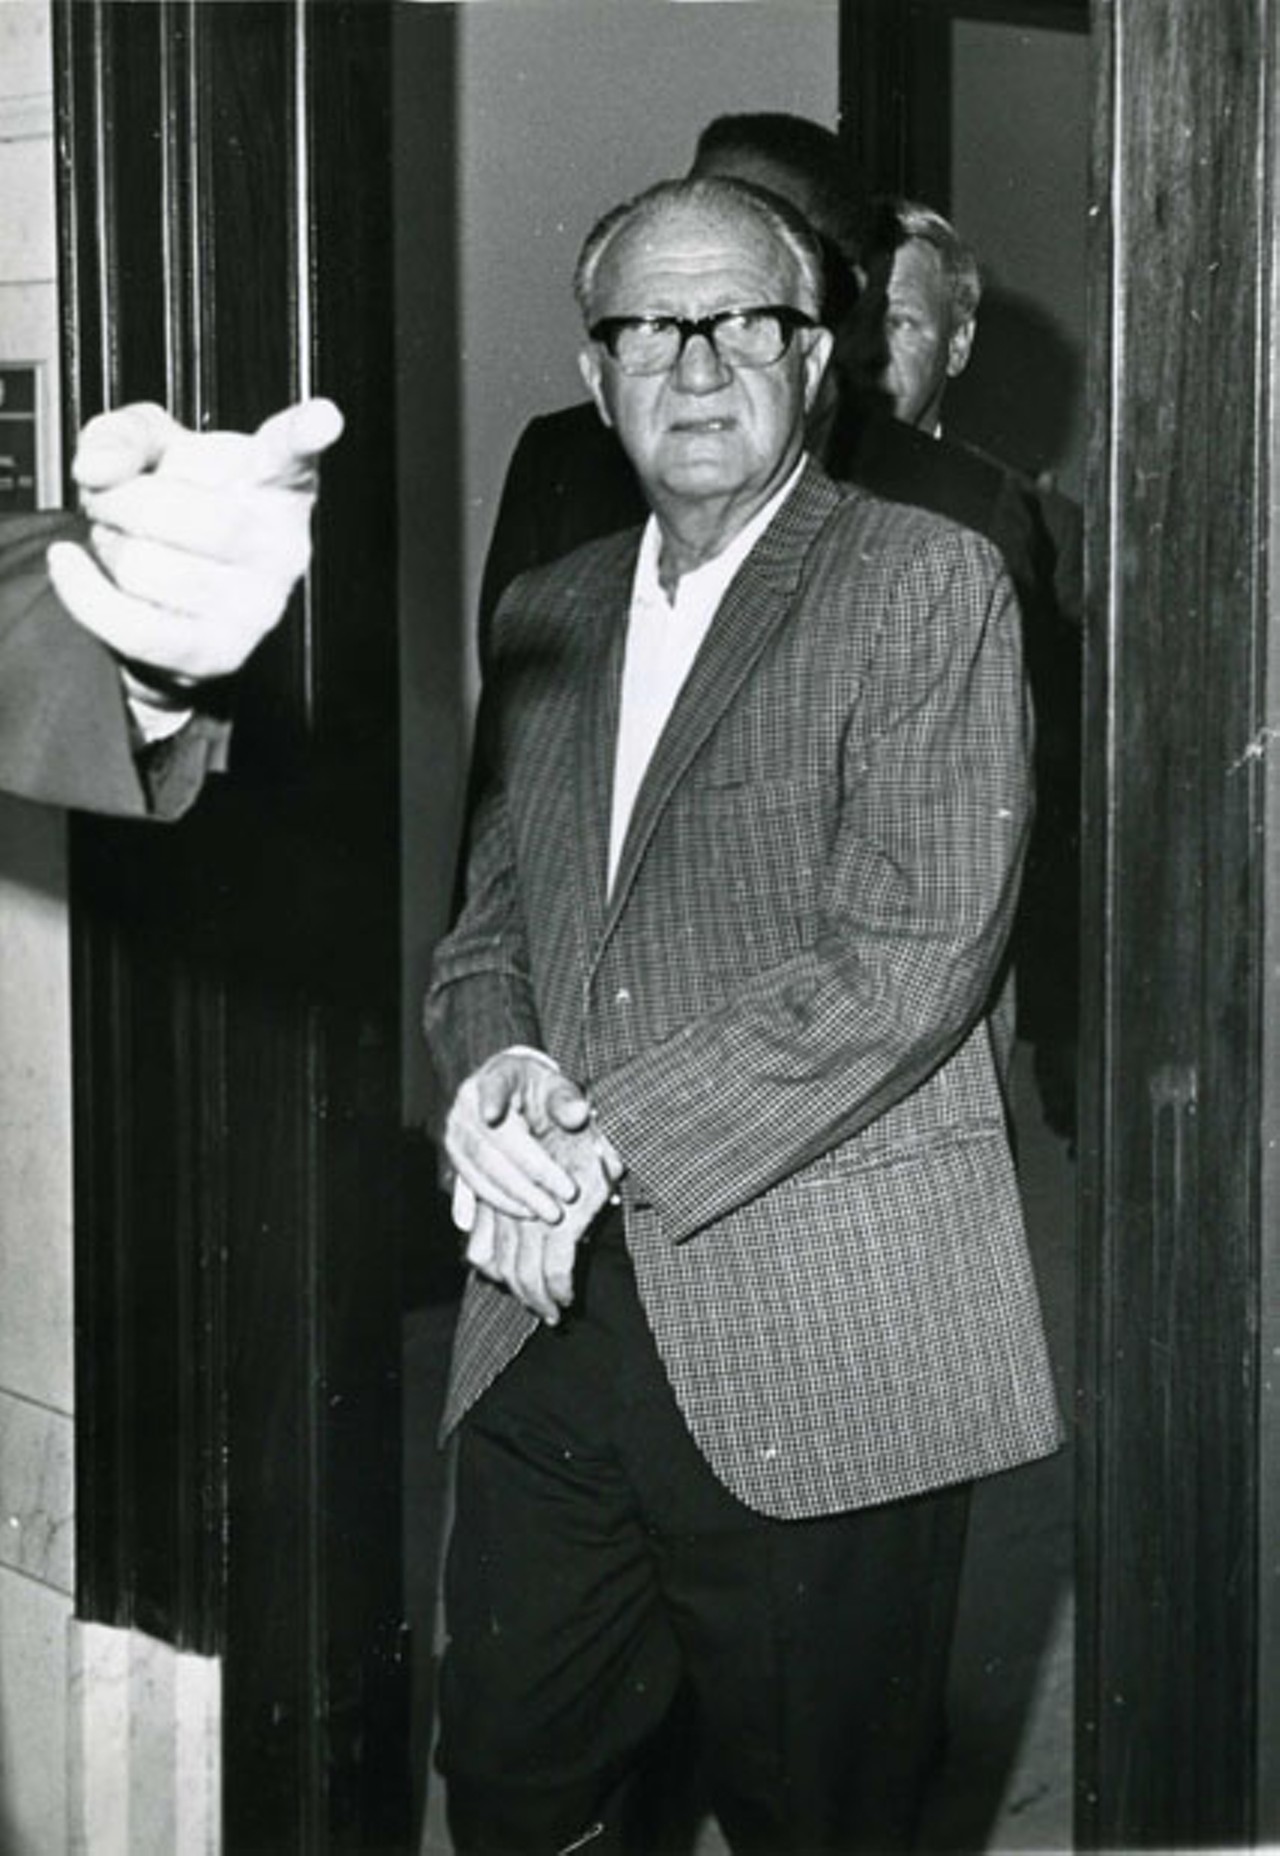 An elderly Shondor Birns leaves a Cleveland courtroom. He died in 1975.